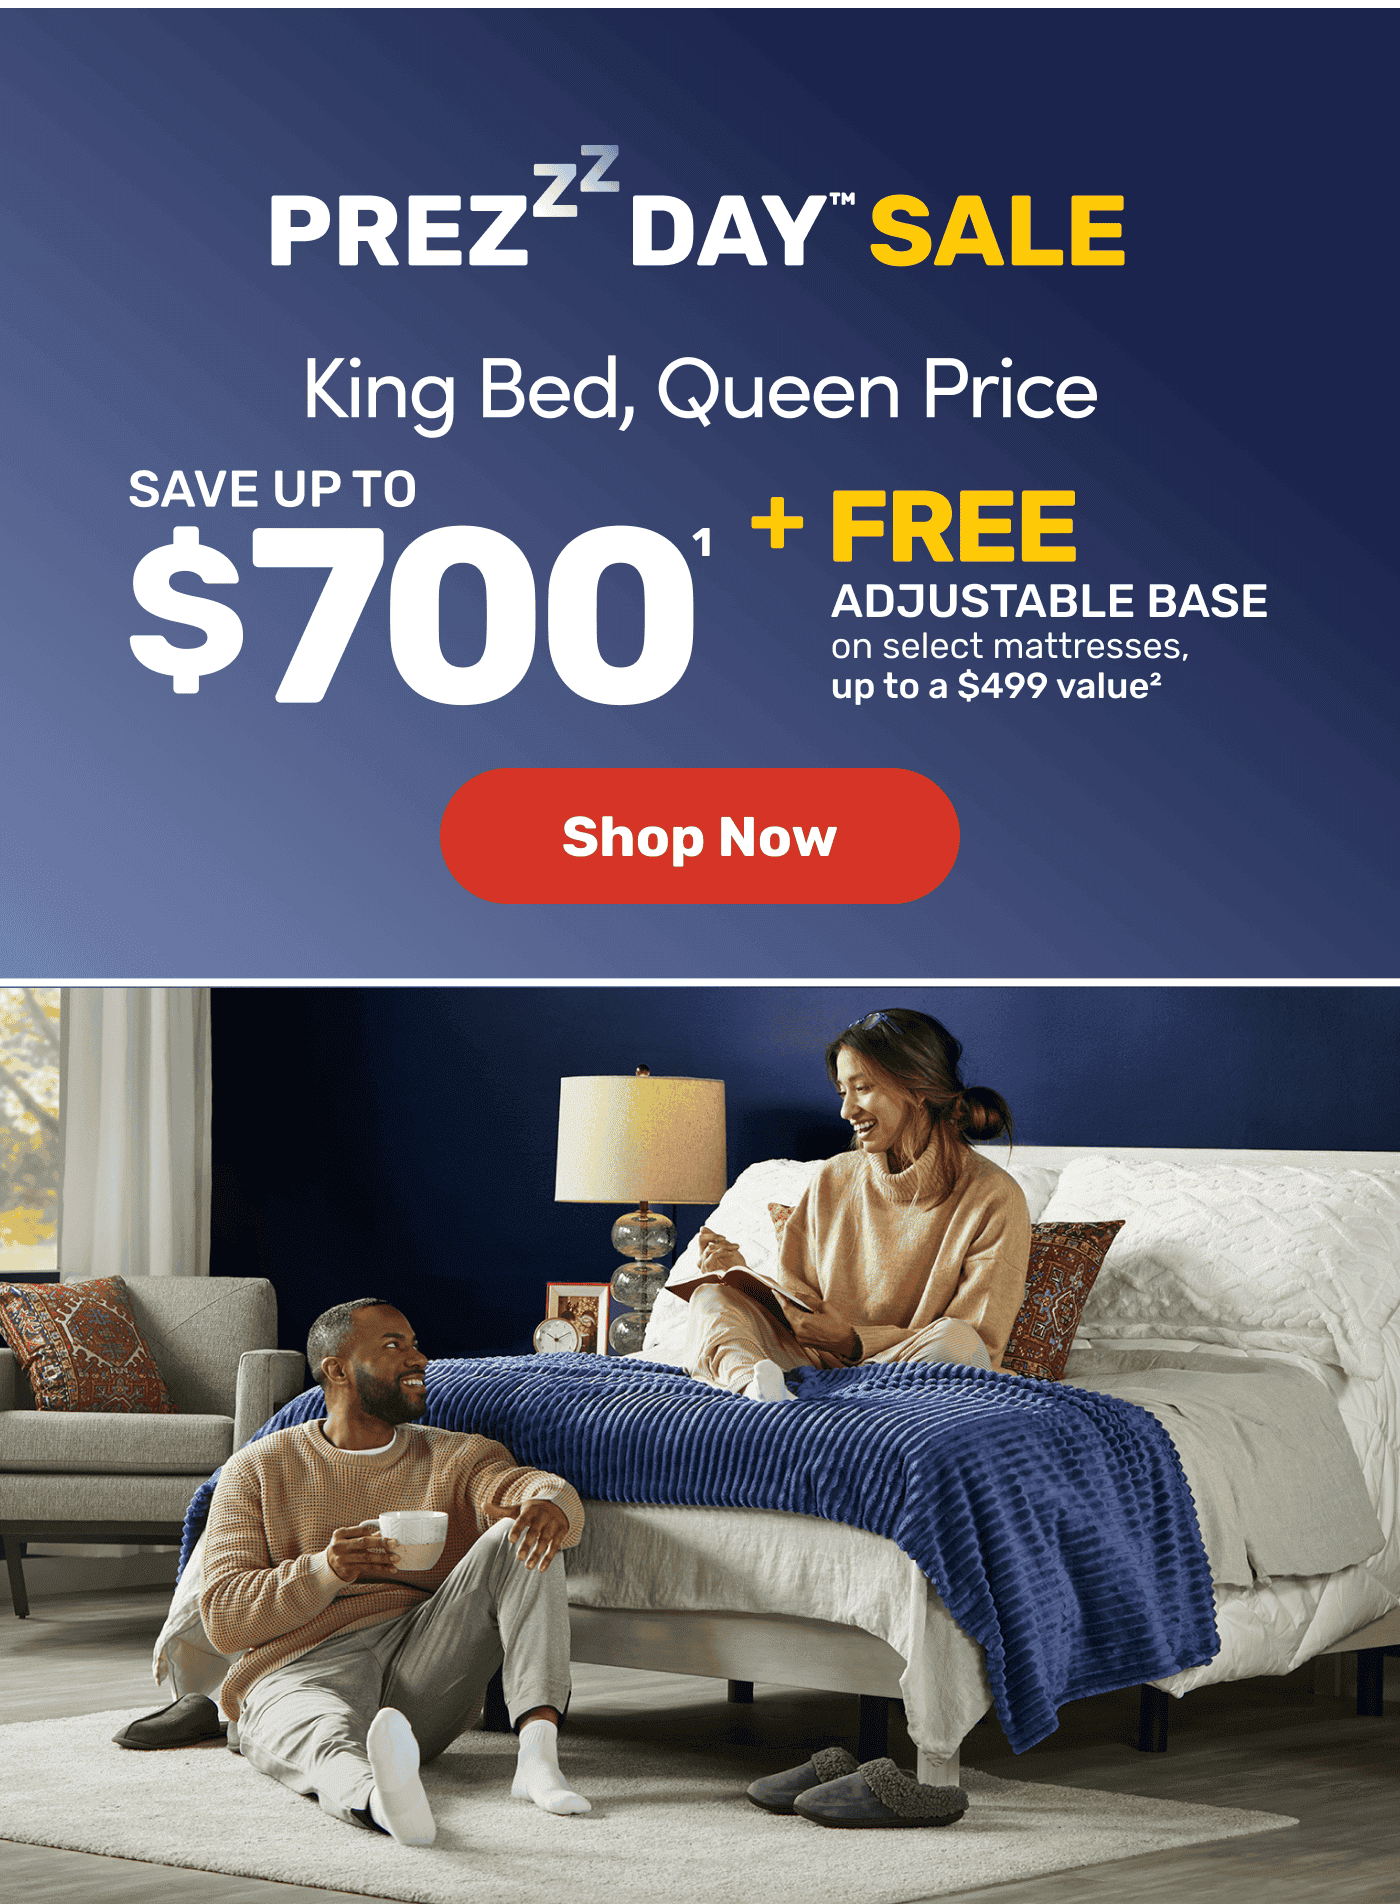 King Bed, Queen Price - SAVE UP TO \\$700